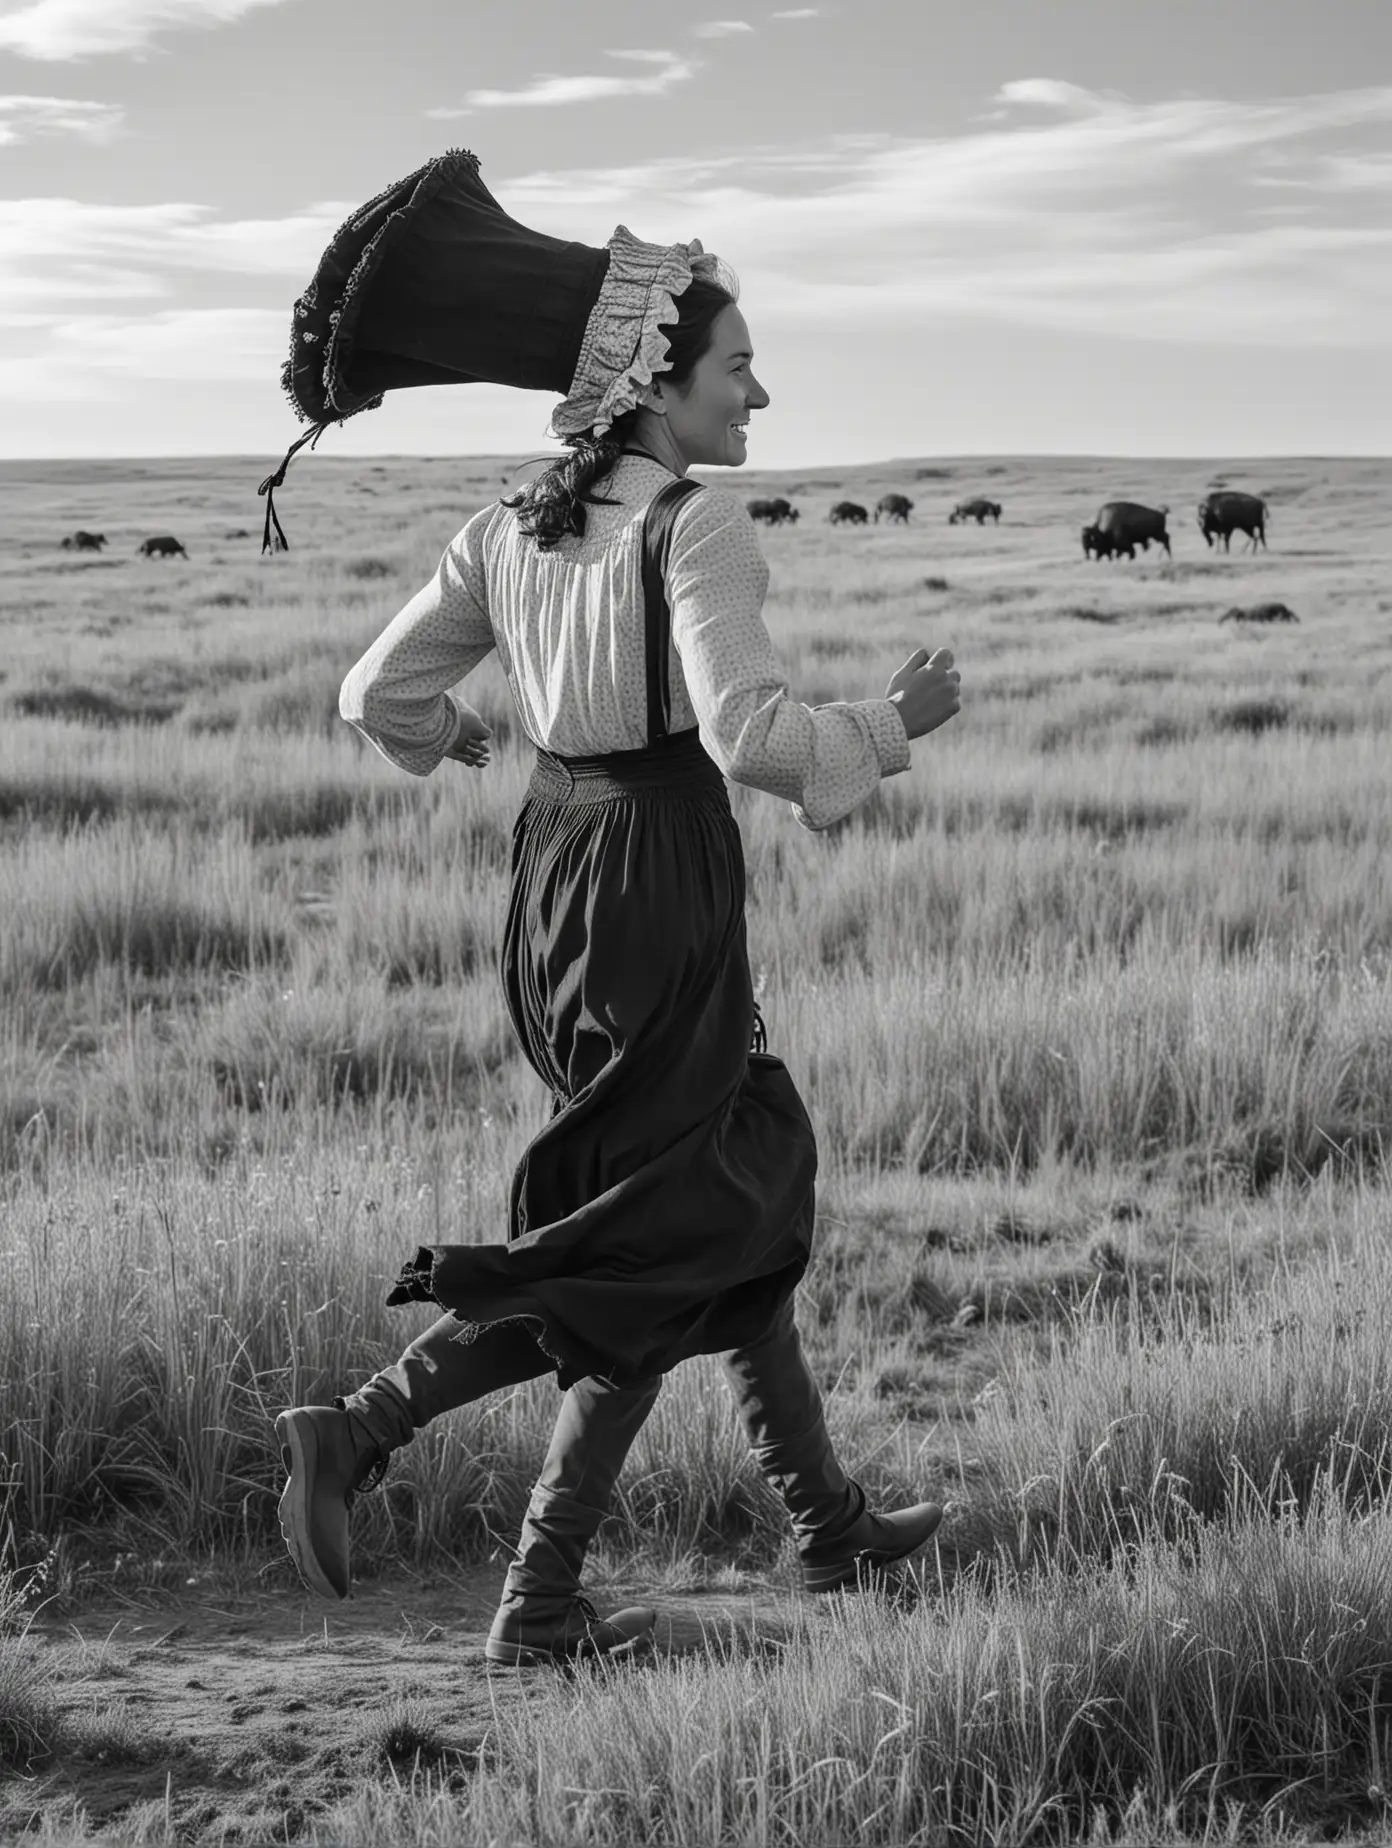 Pioneer Woman Running on the Prairie with Buffalo in the Background